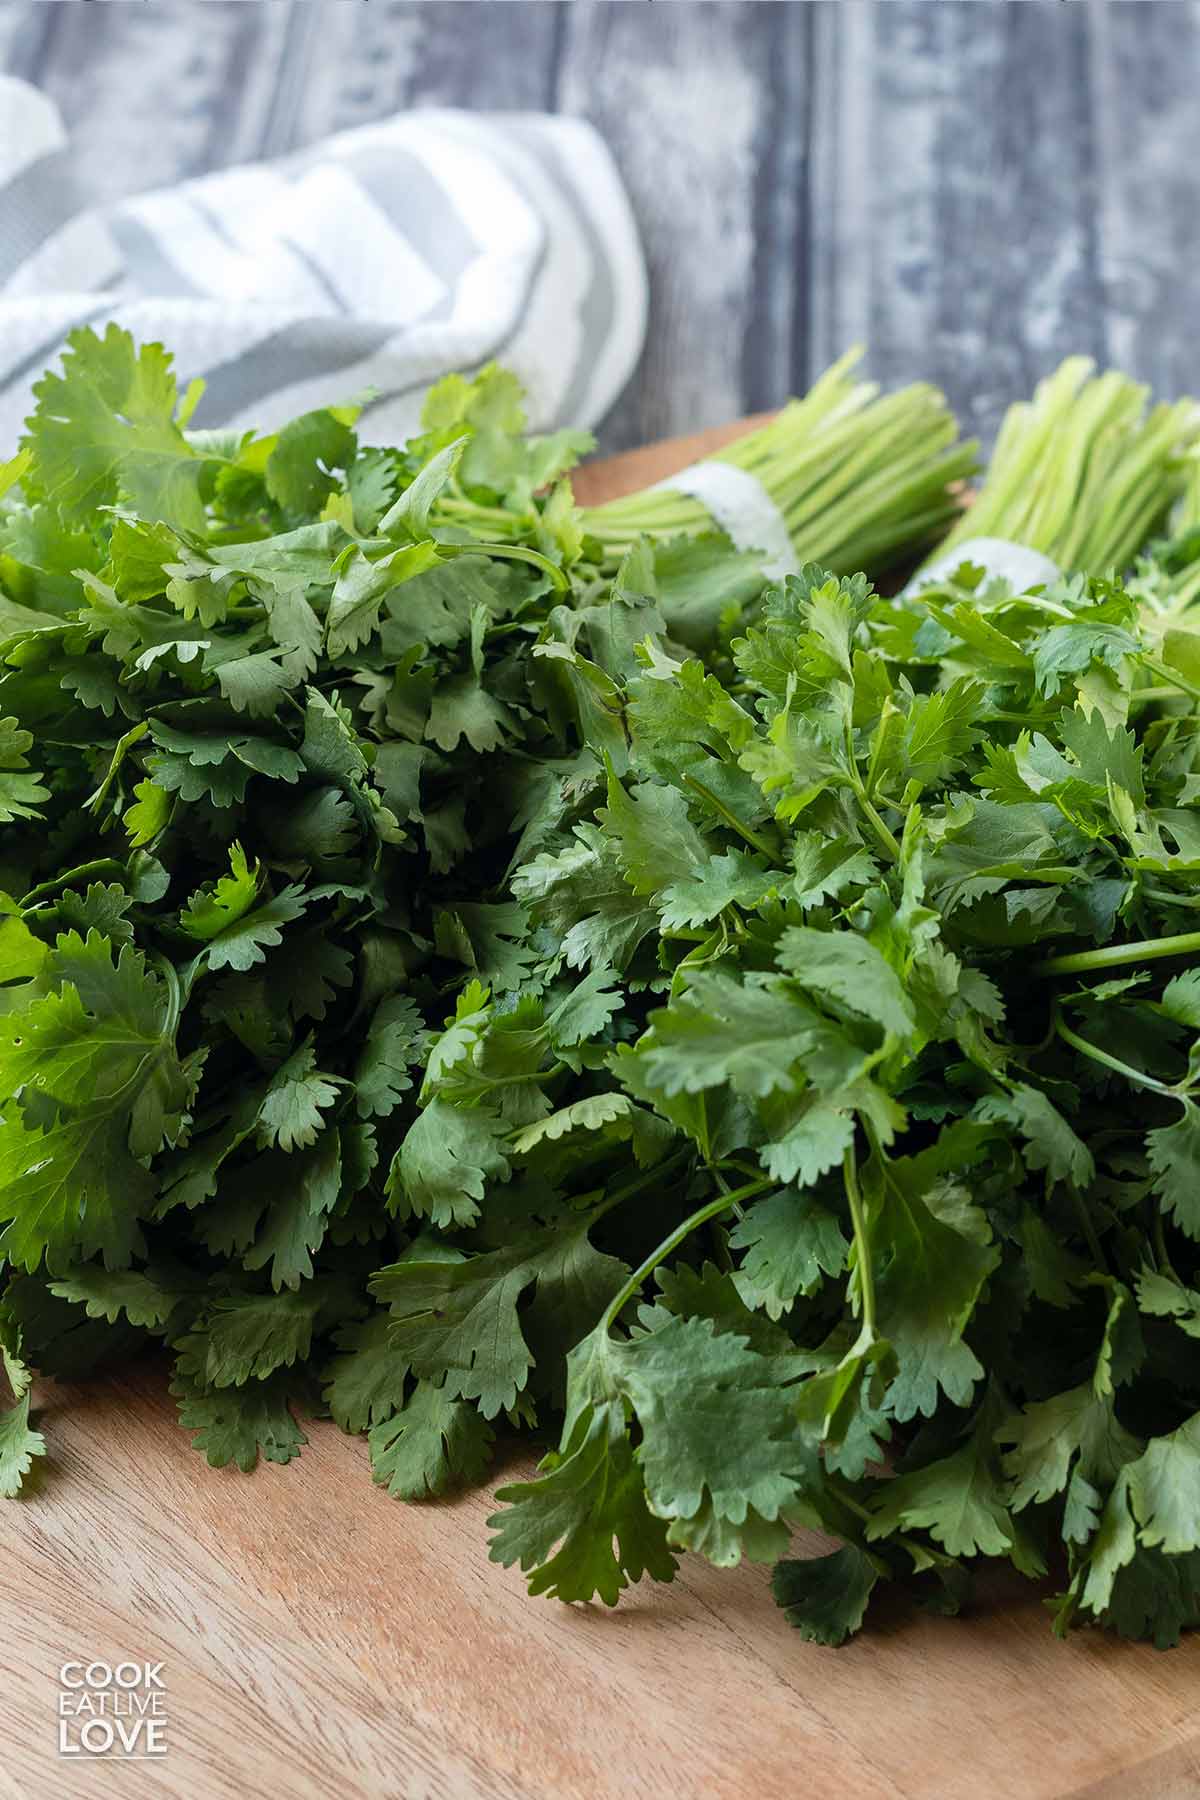 Bunches of cilantro on the table.